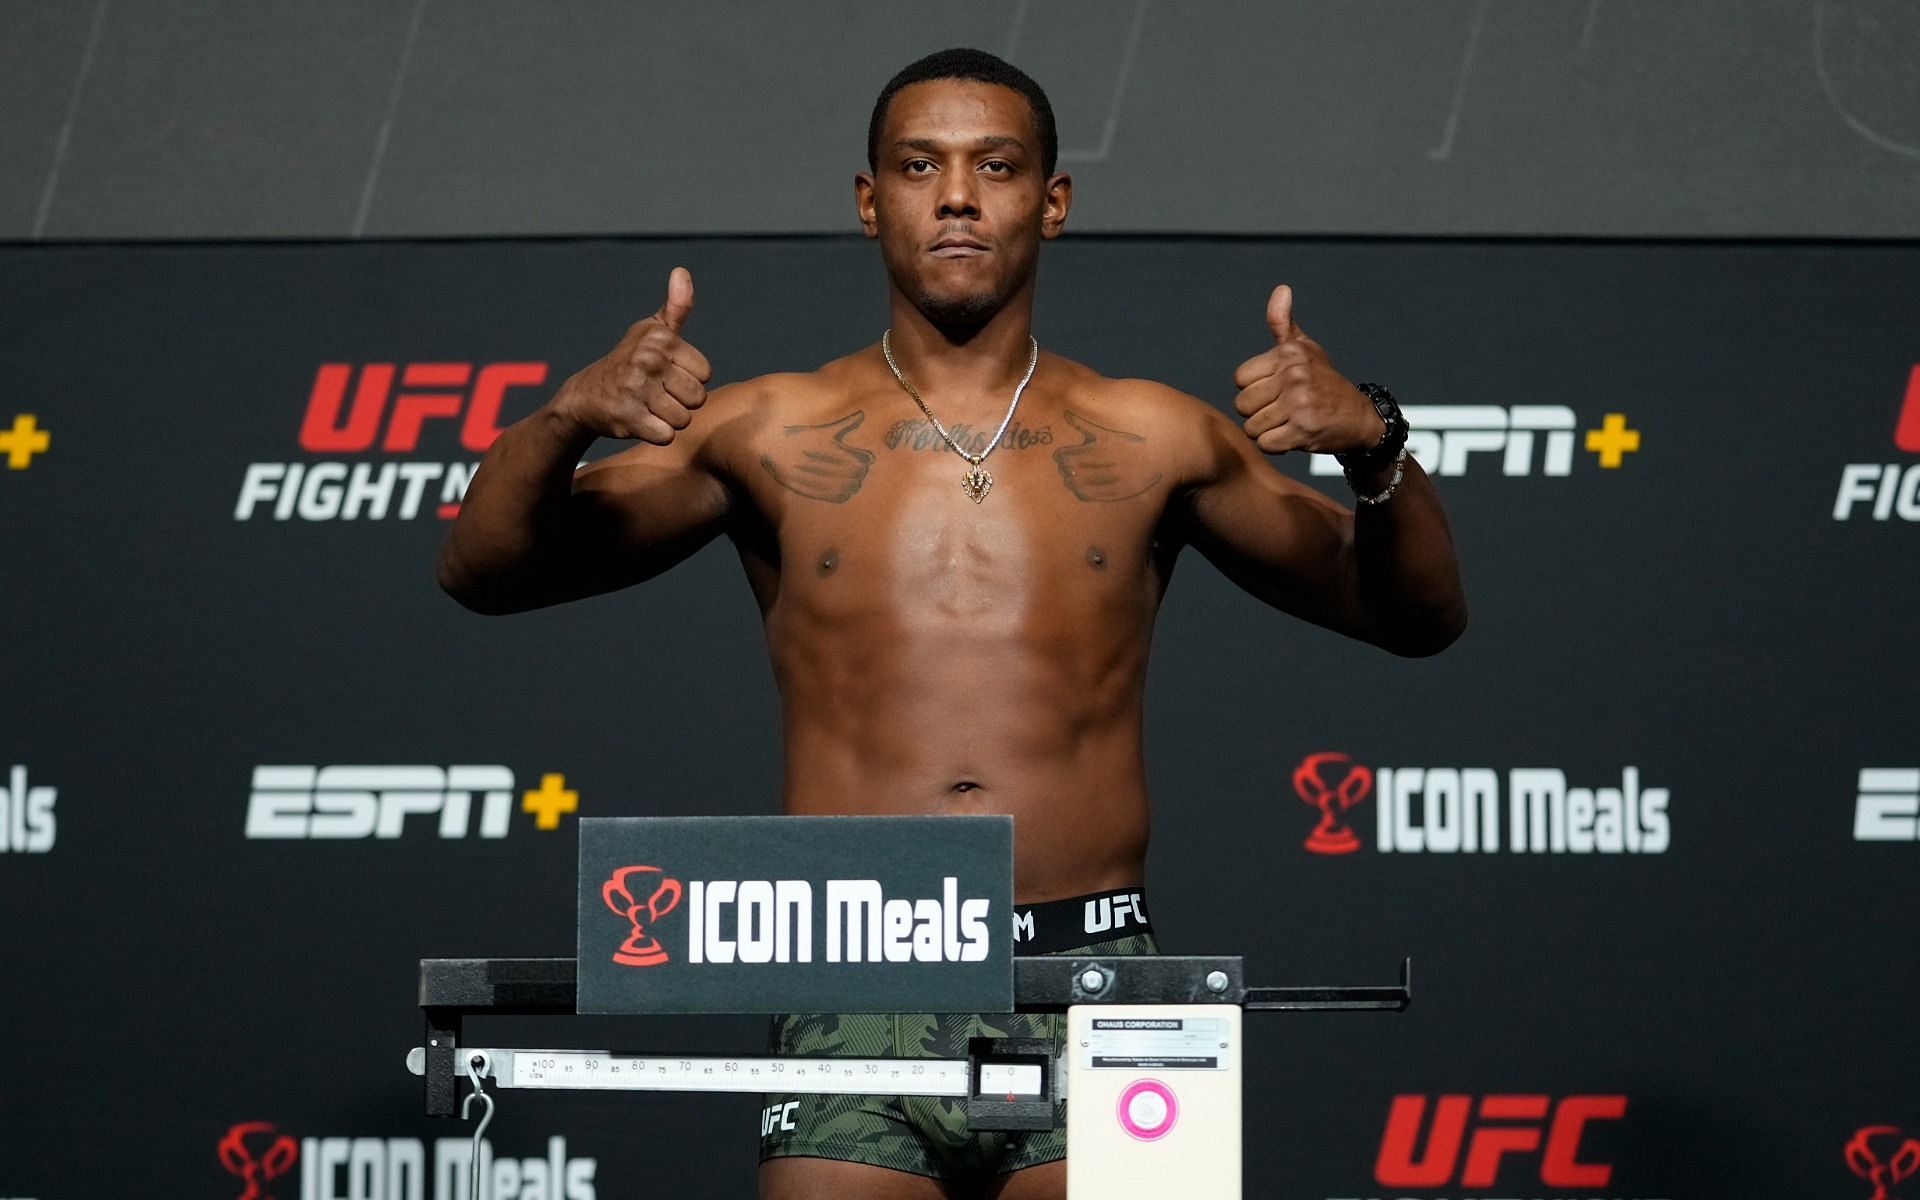 Hill poses on the scale during the UFC Fight Night 201 aka UFC Vegas 48 weigh-ins in Las Vegas, Nevada on Friday